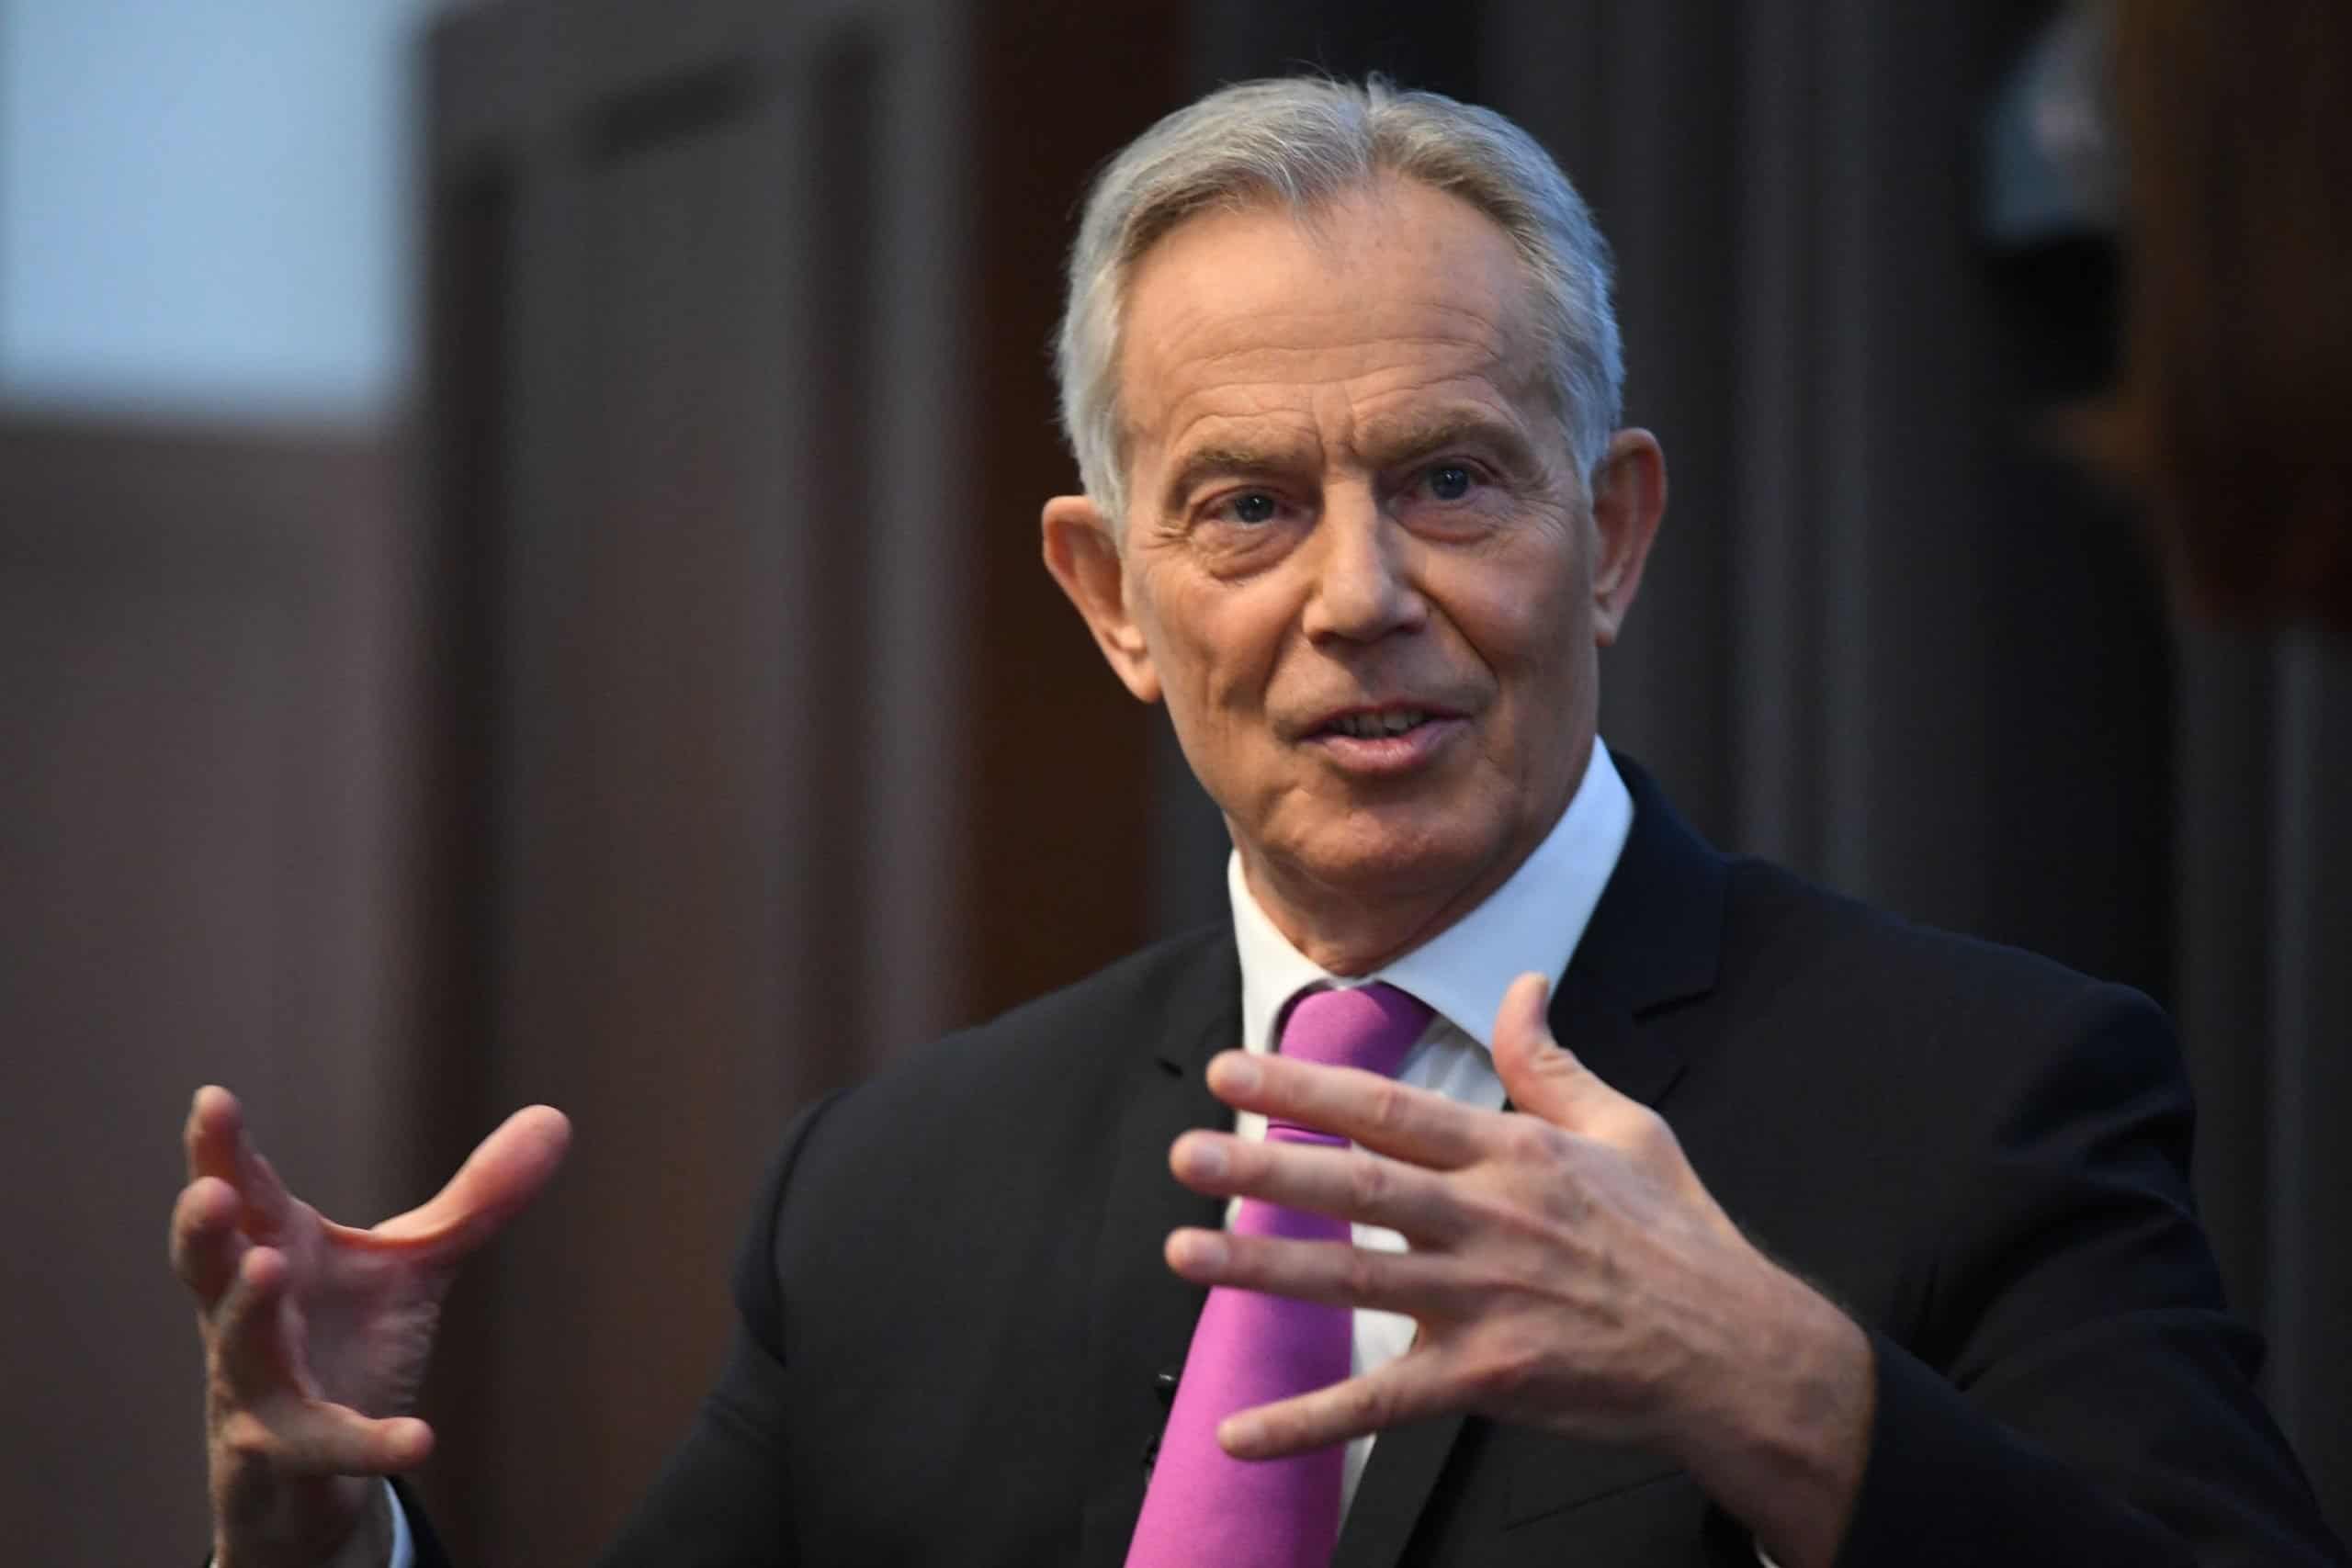 Watch: Bizarre clip of Tony Blair at accession council ceremony is lampooned